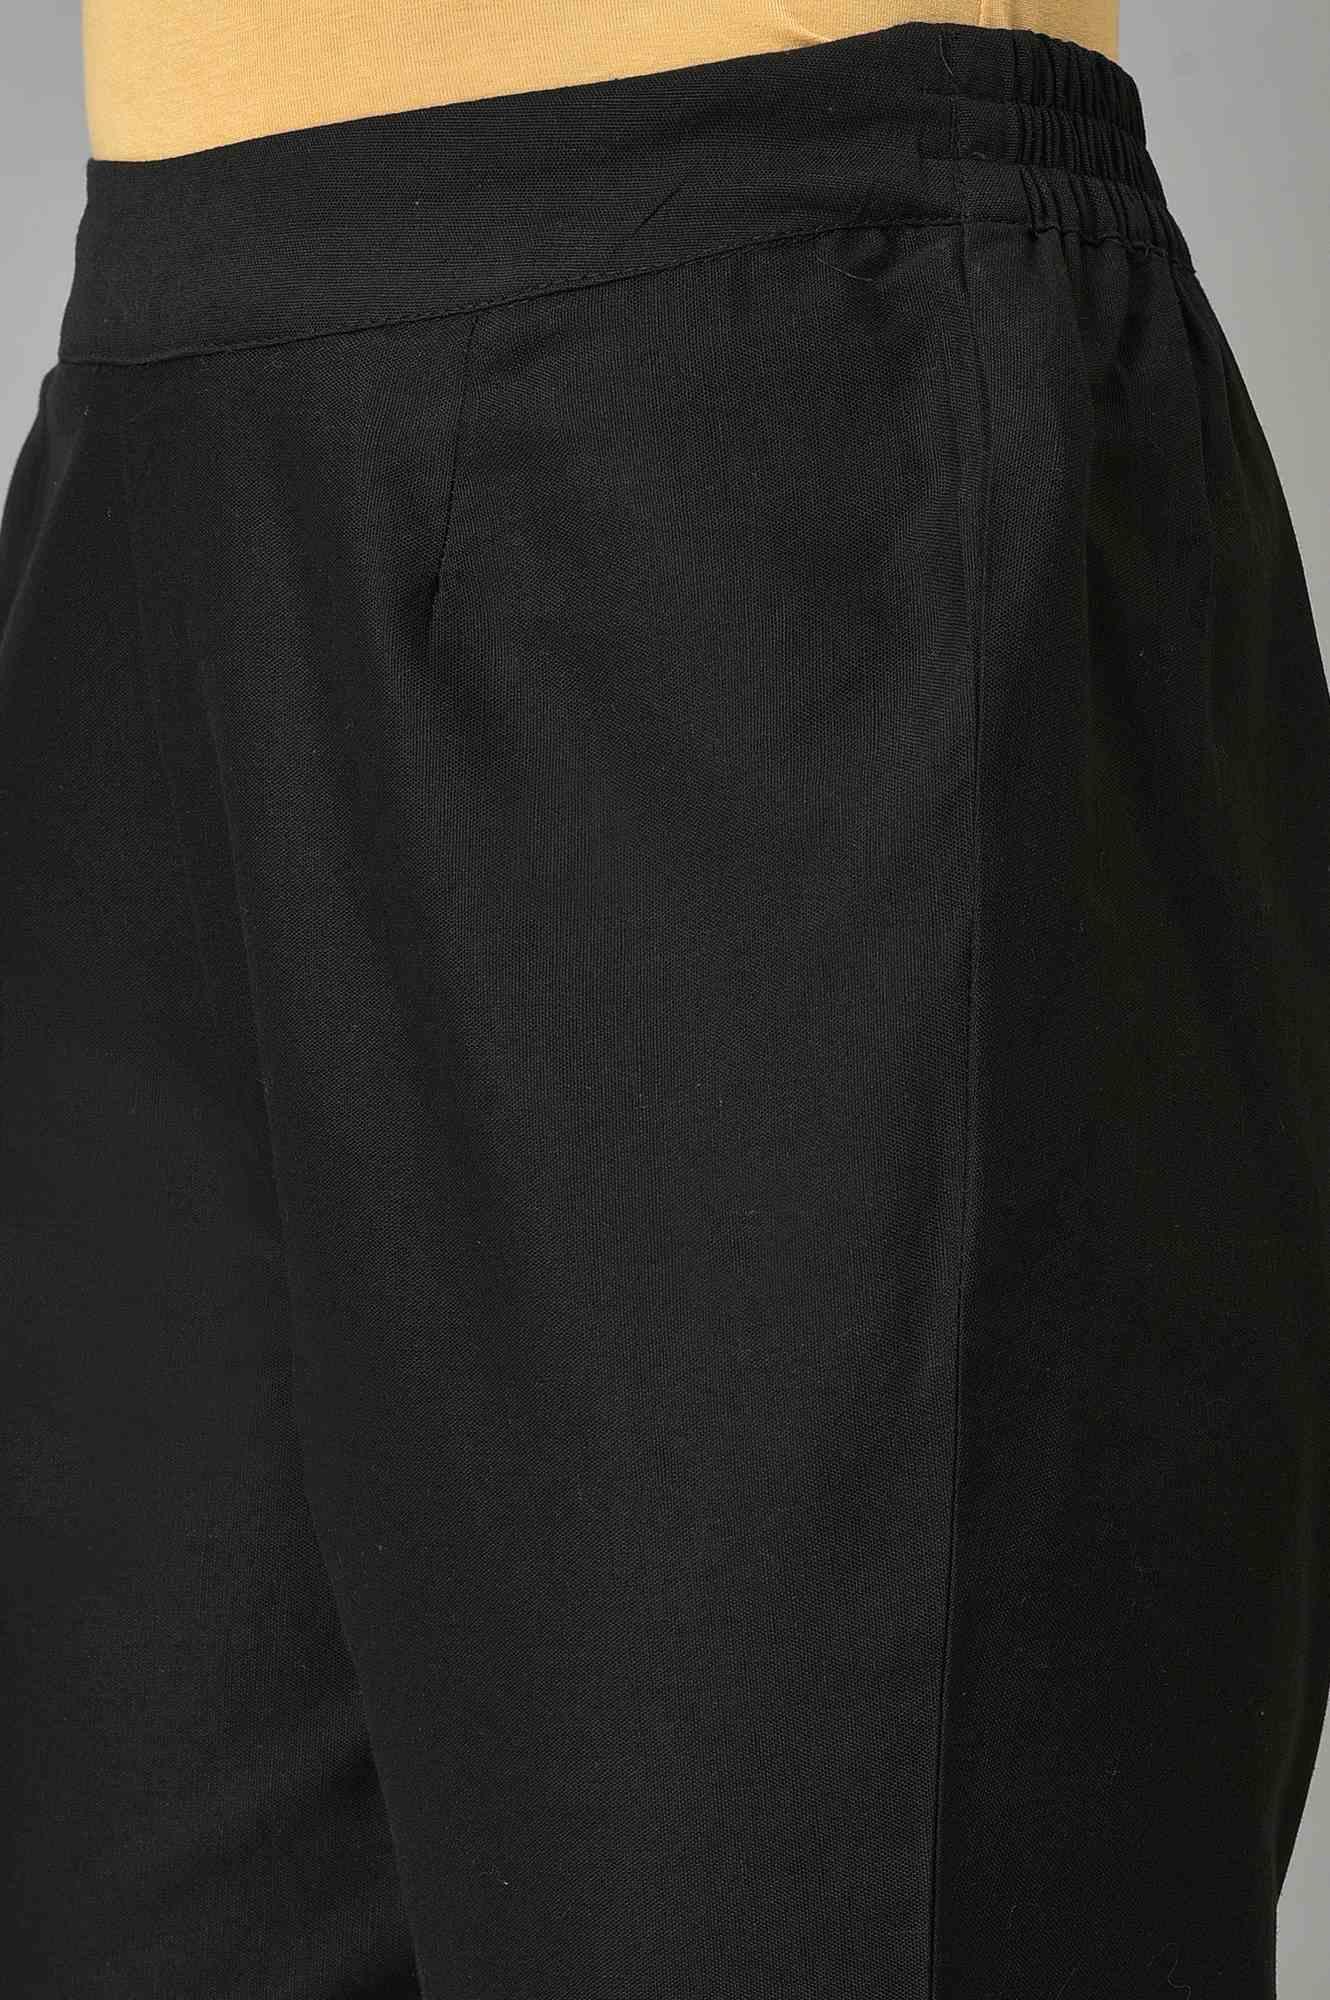 Plus Size Black Slim Pants With Embroidery At Hemline - wforwoman